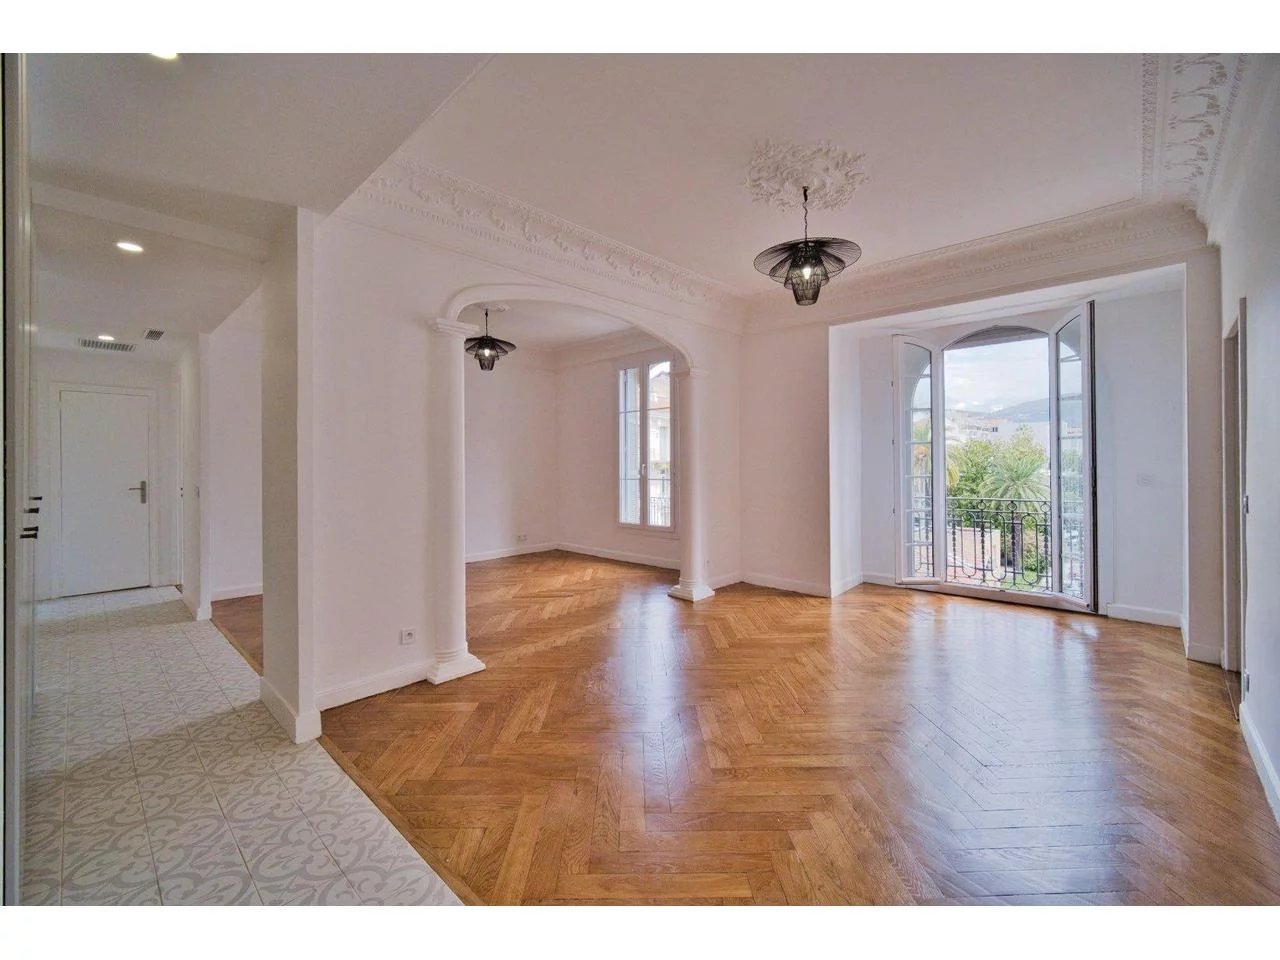 Appartement  3 Rooms 90m2  for sale   765 000 €